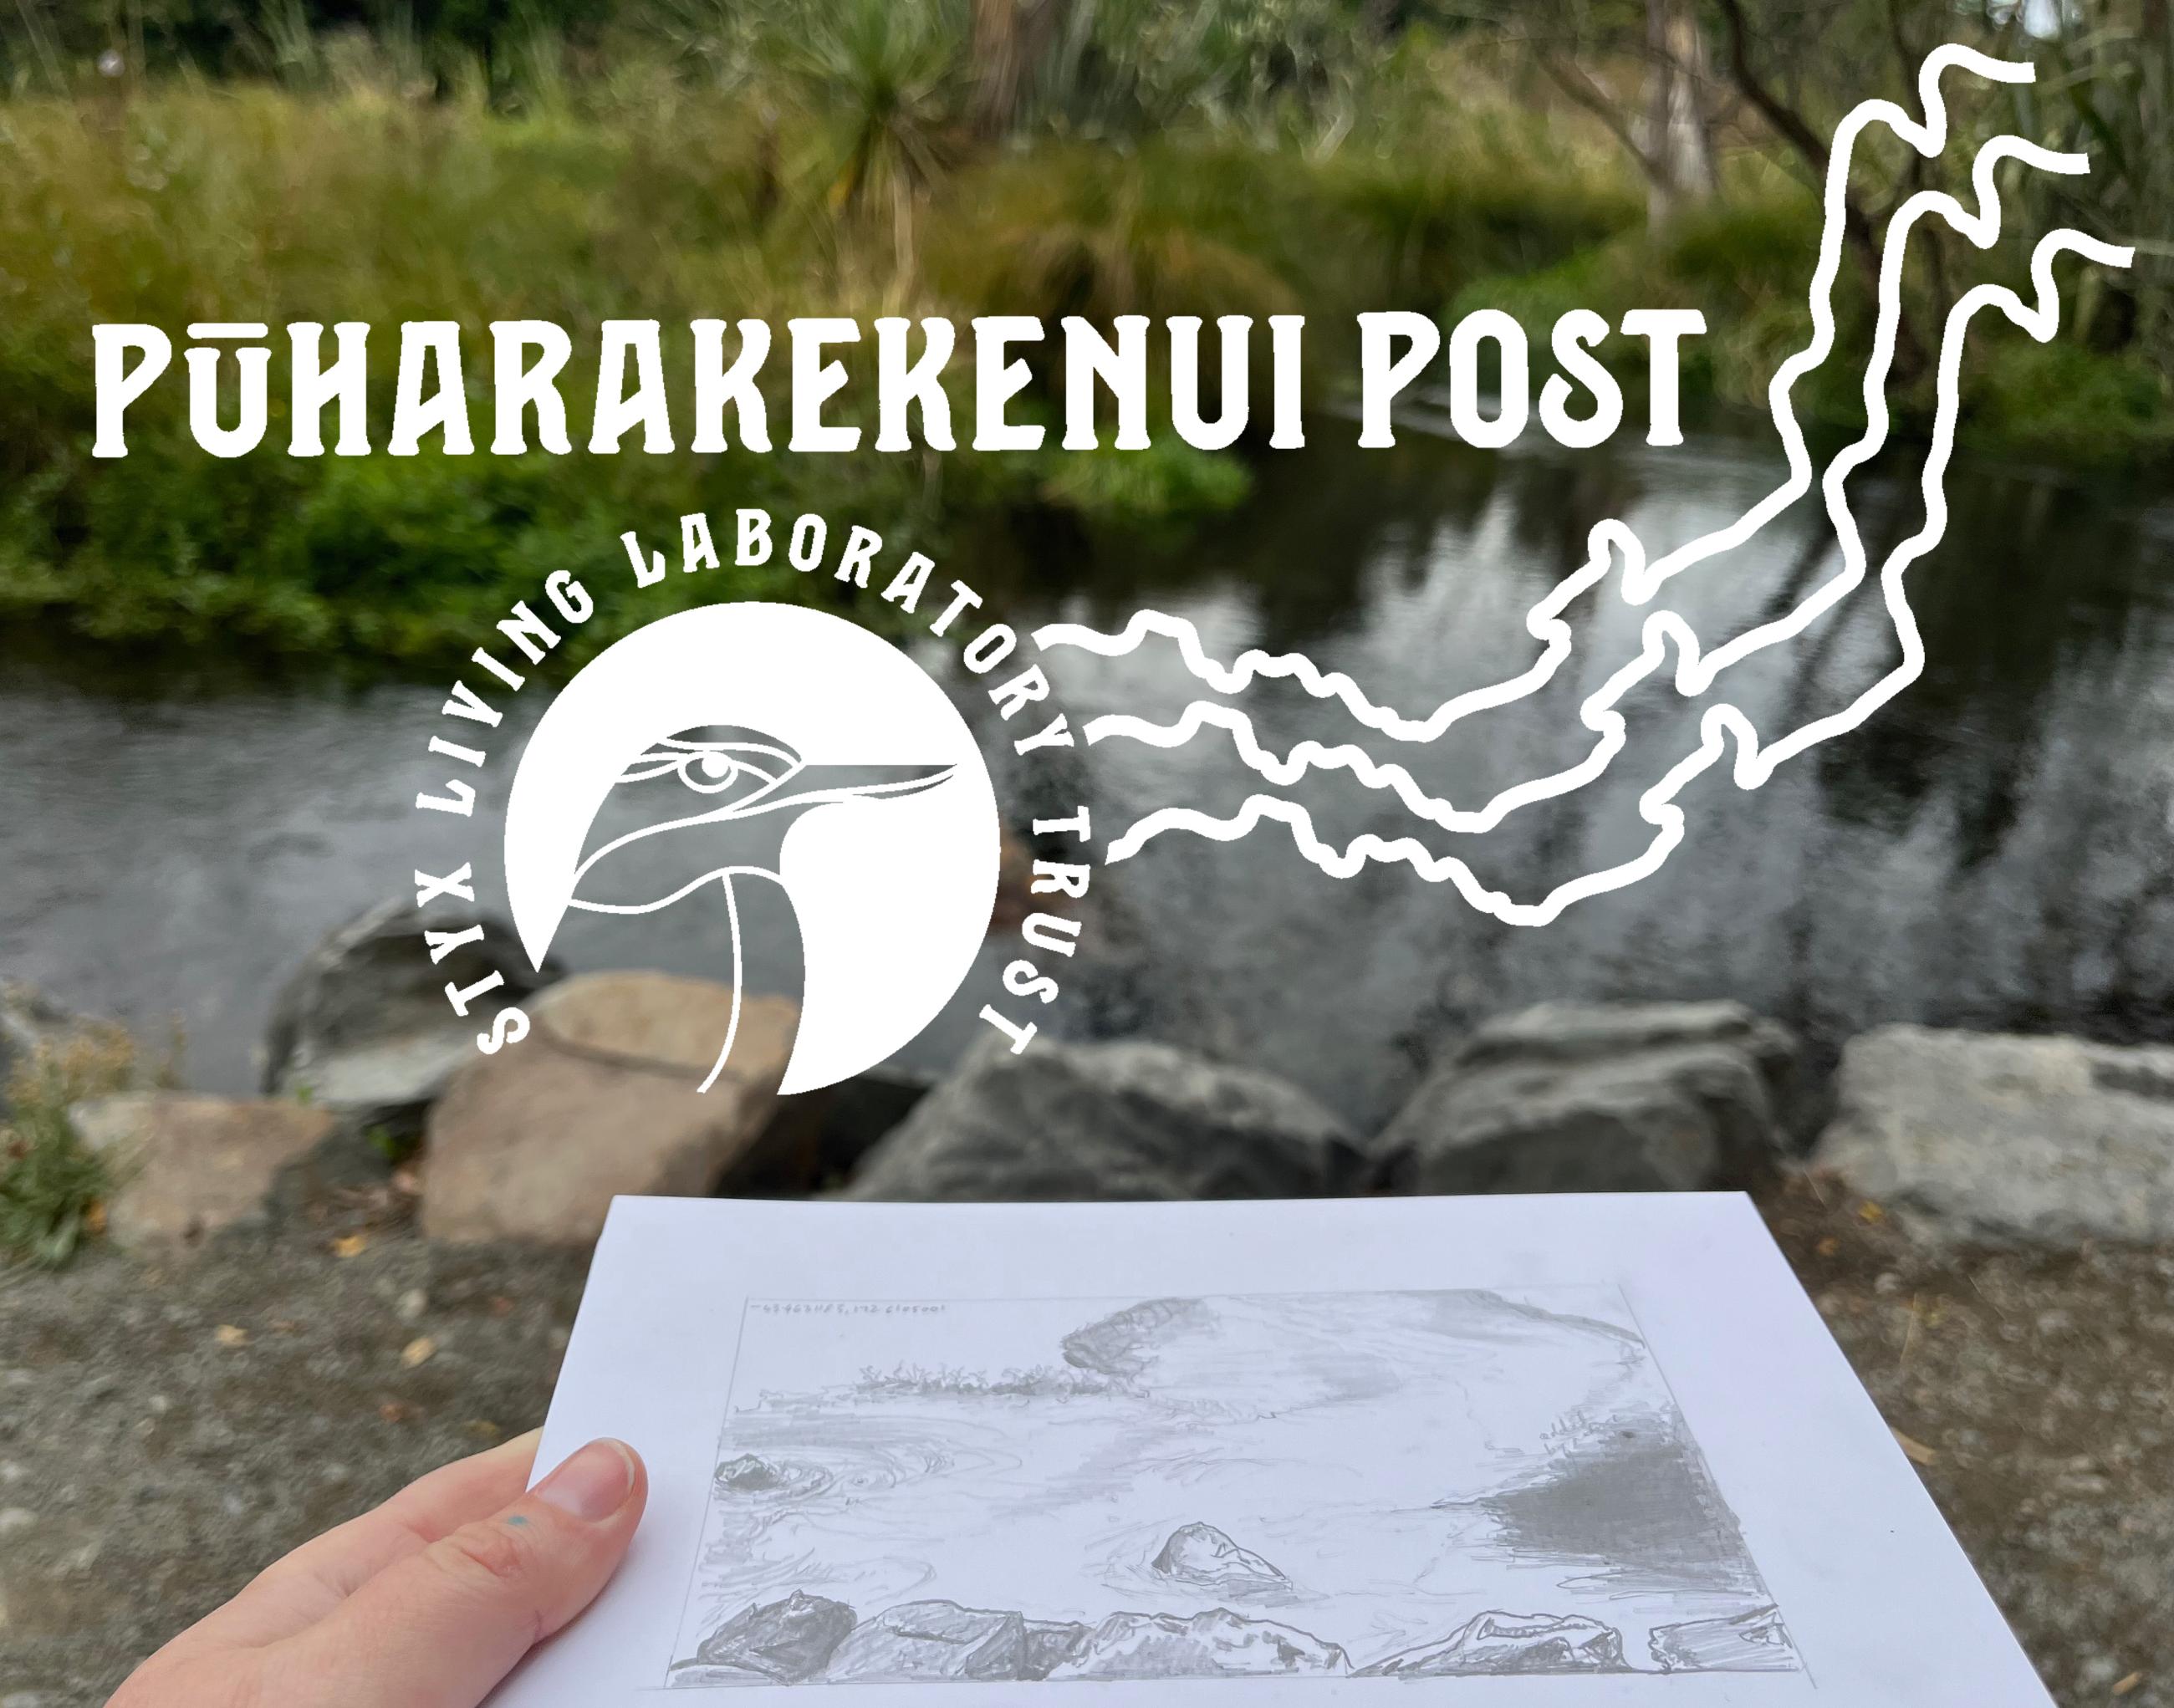 The Pūharakekenui Post logo in white is overlaid on a photo of a drawing of a stream, held up infront of the stream that the drawing depicts